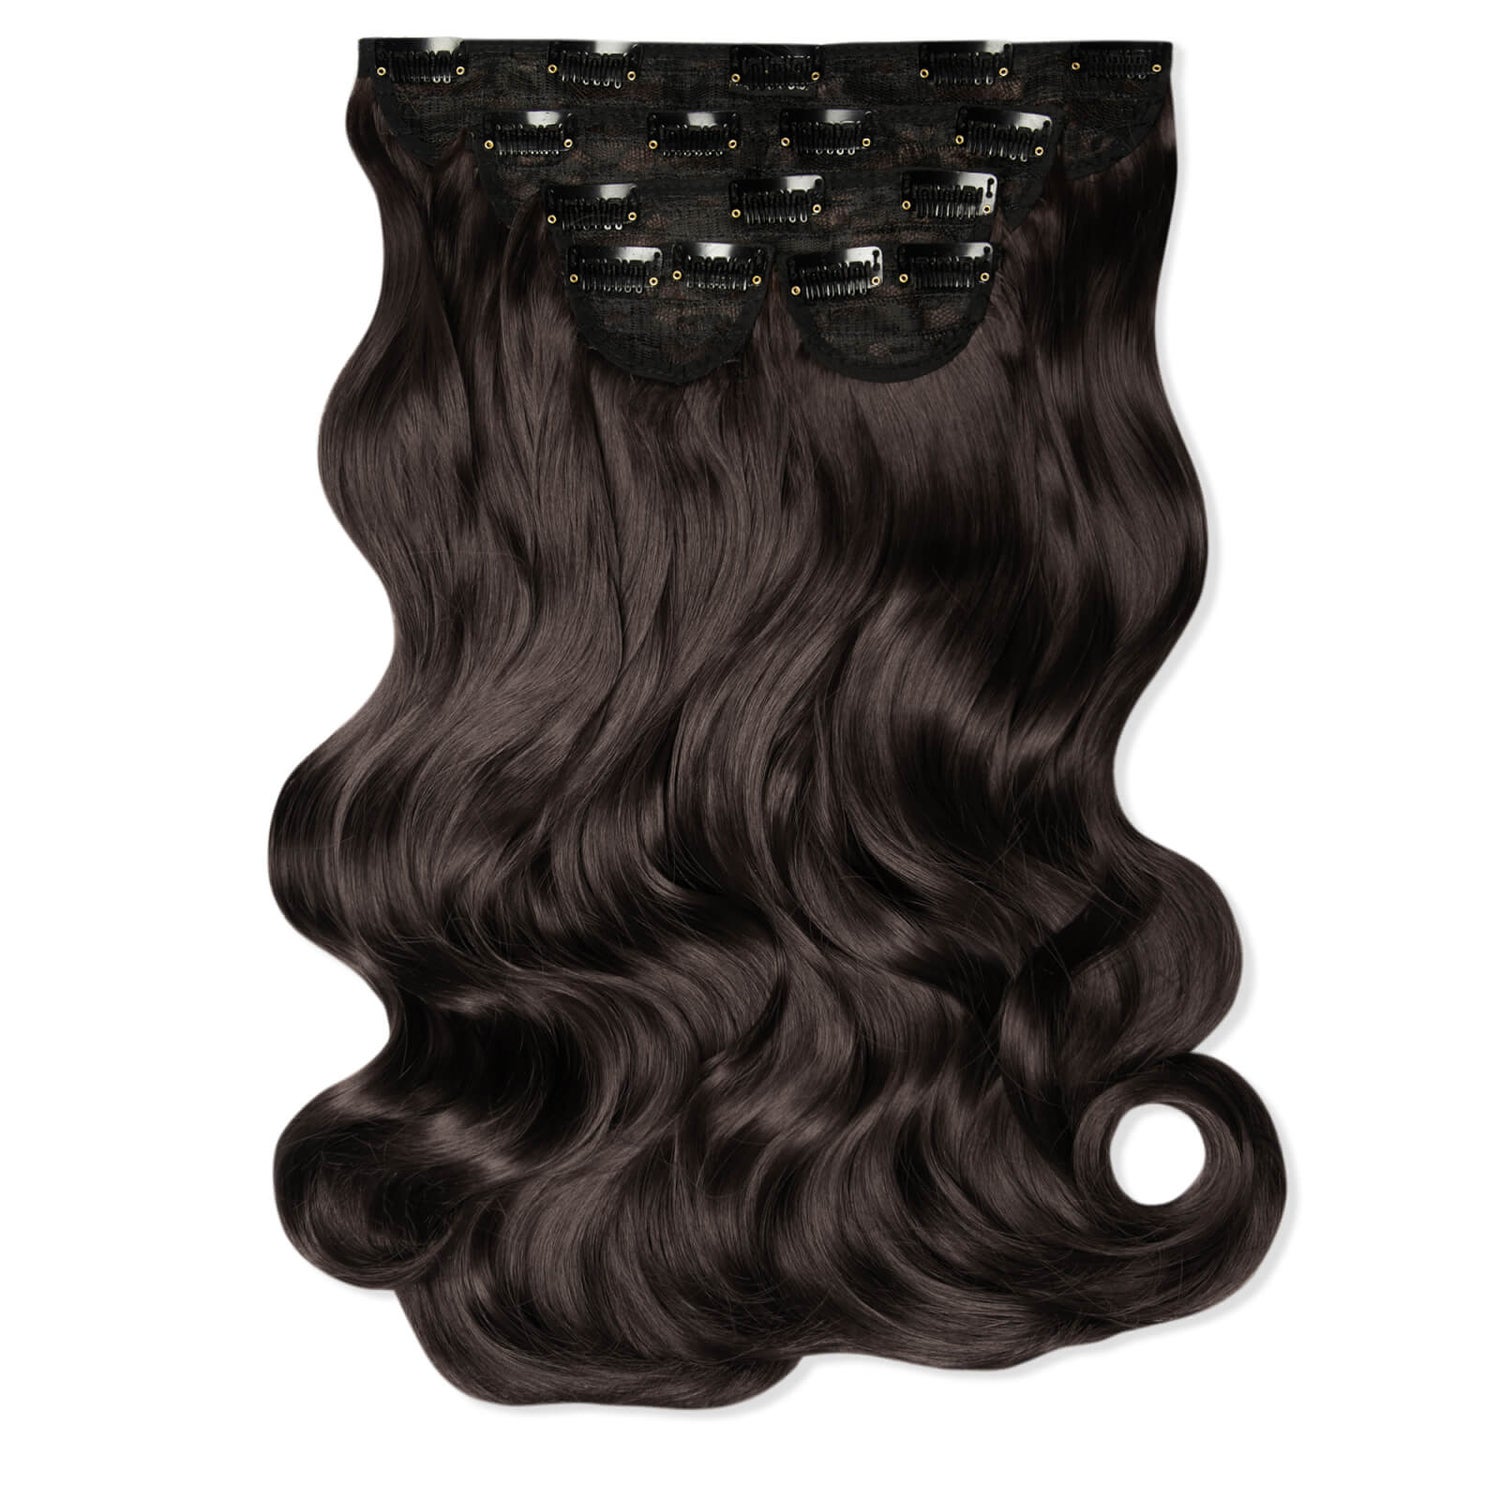 Lullabellz Super Thick 22 5 Piece Natural Wavy Clip In Extensions Various Shades Lookfantastic 